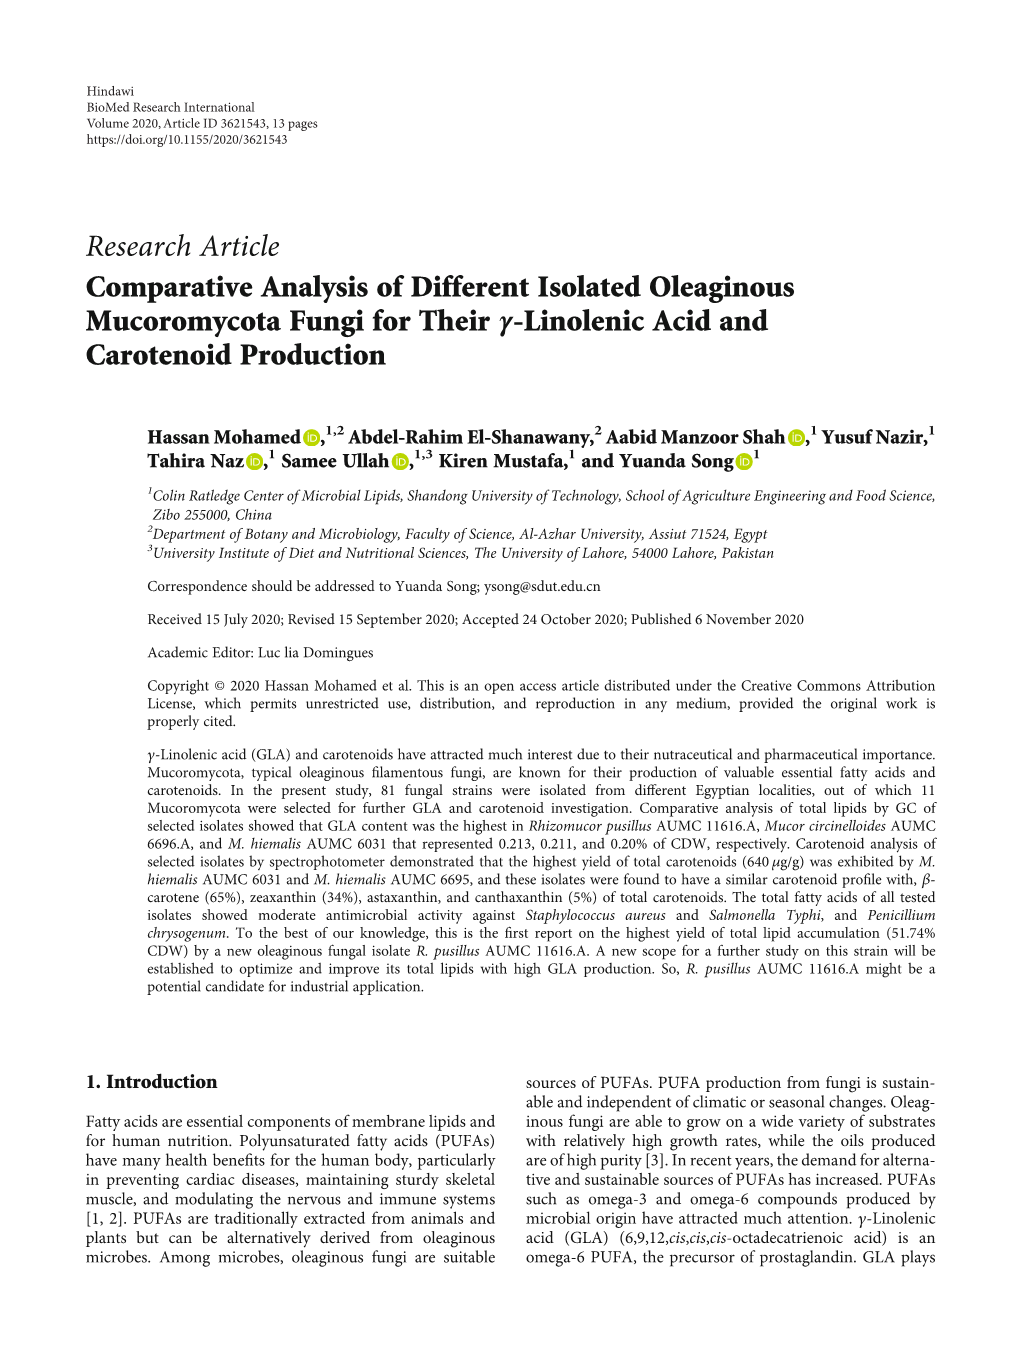 Research Article Comparative Analysis of Different Isolated Oleaginous Mucoromycota Fungi for Their Γ-Linolenic Acid and Carotenoid Production